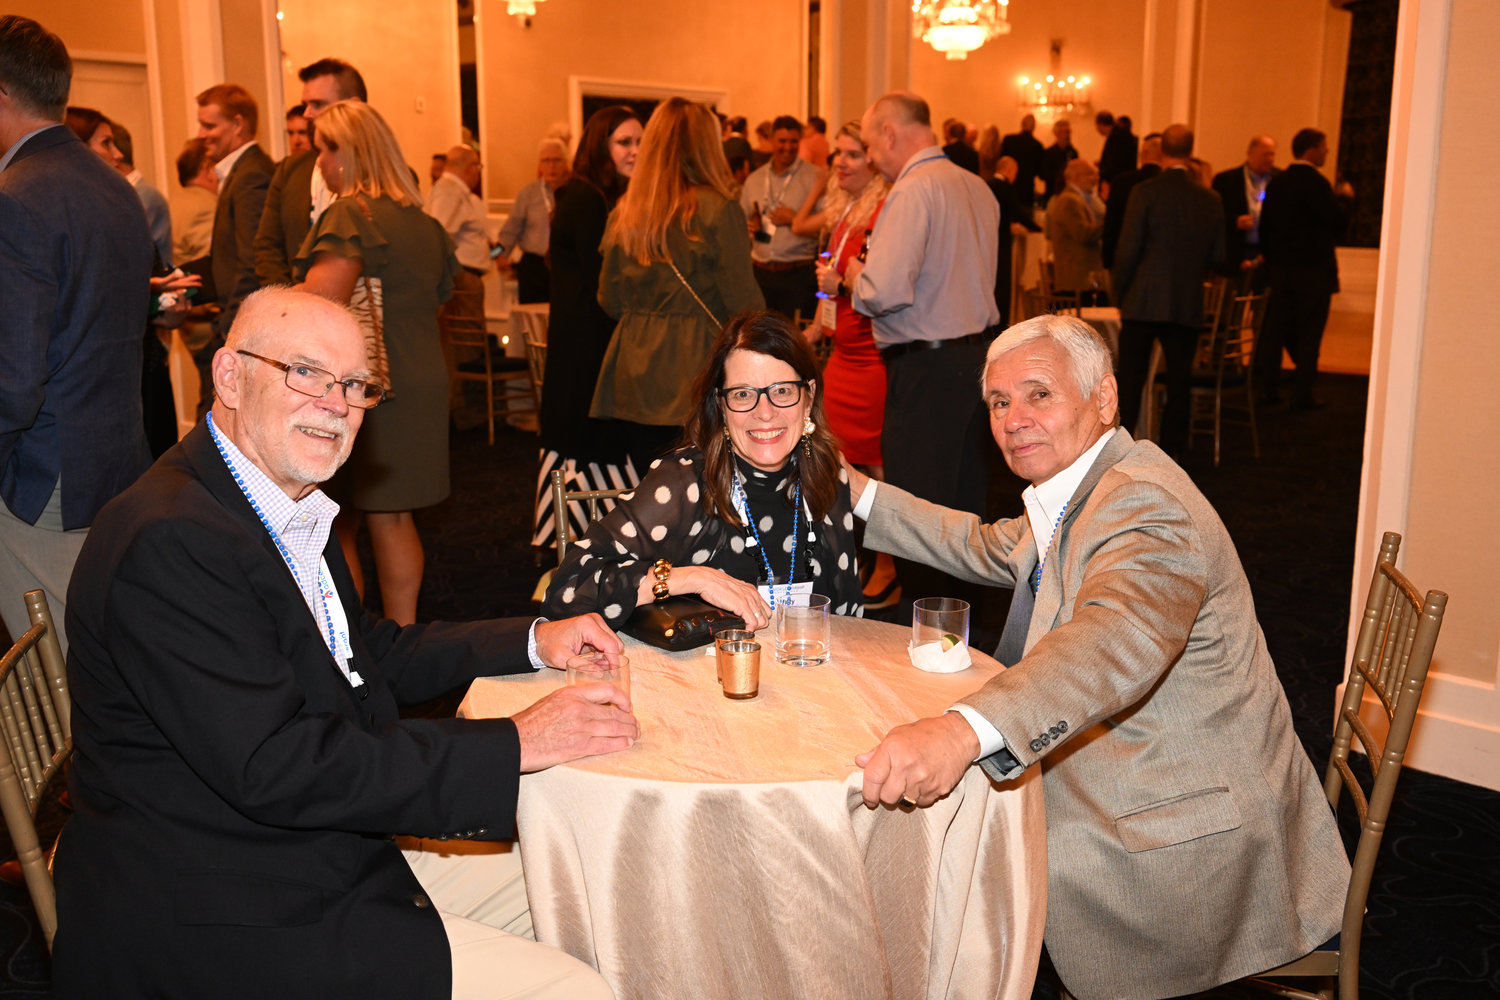 Sunday evening welcome reception. (Photo by Jeff Strout)